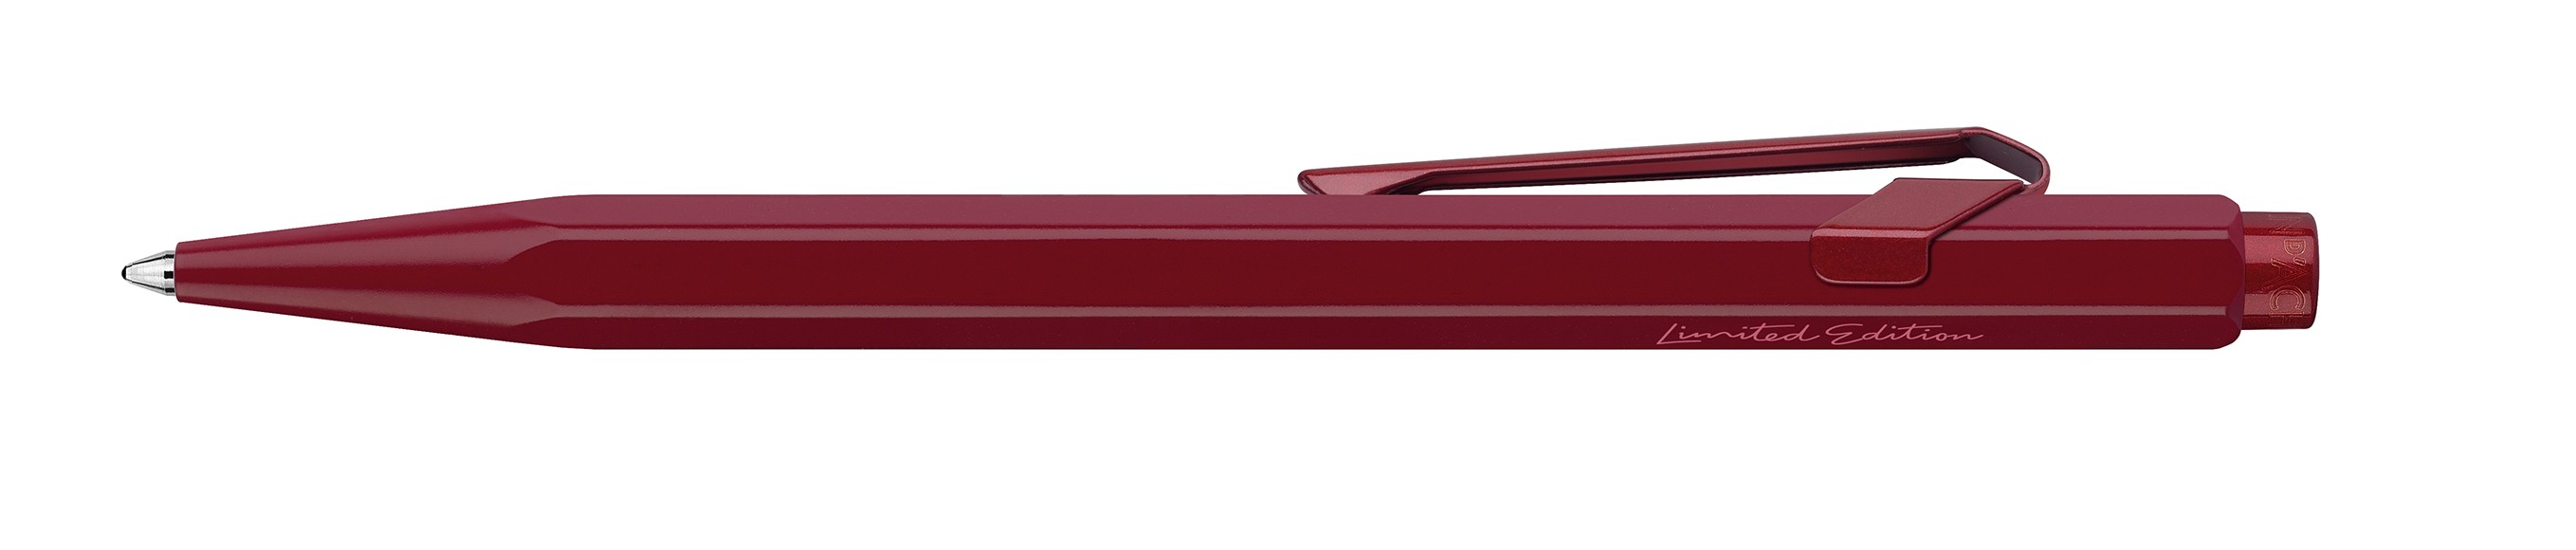 Caran d'Ache 849 Claim Your Style 4 Limited Edition Garnet Red Ballpoint